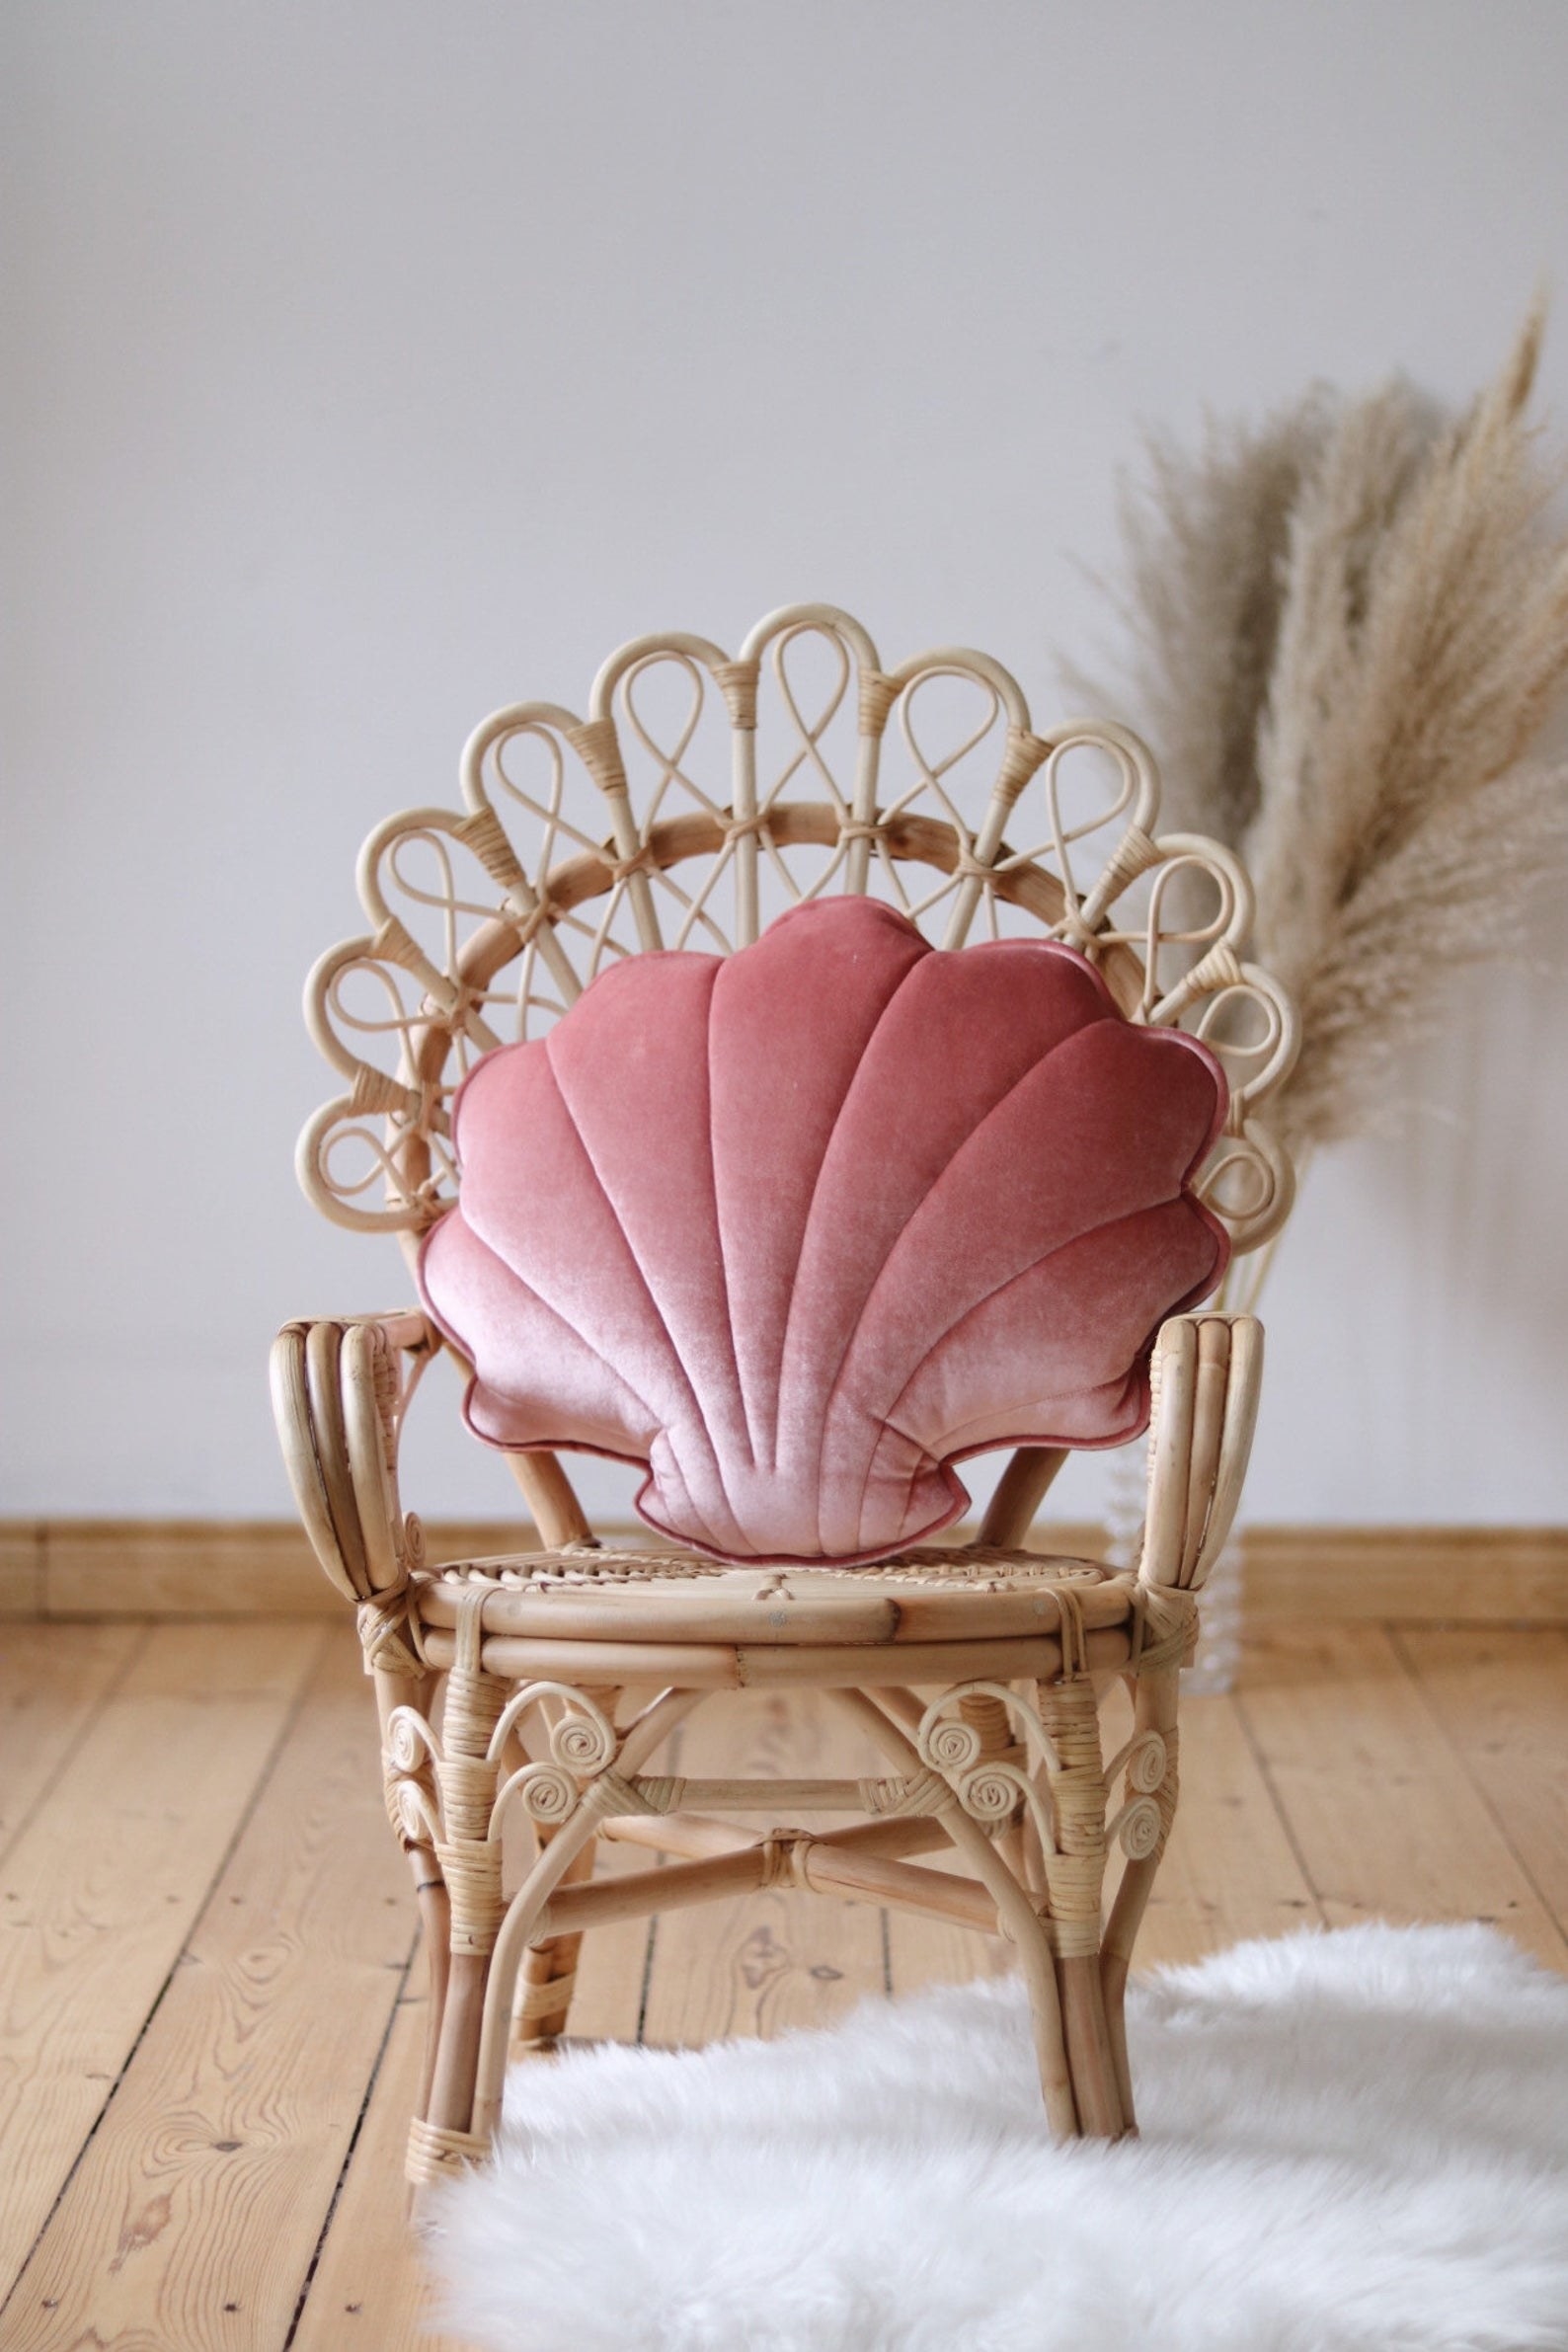 pillow shaped like a shell in a pink fabric